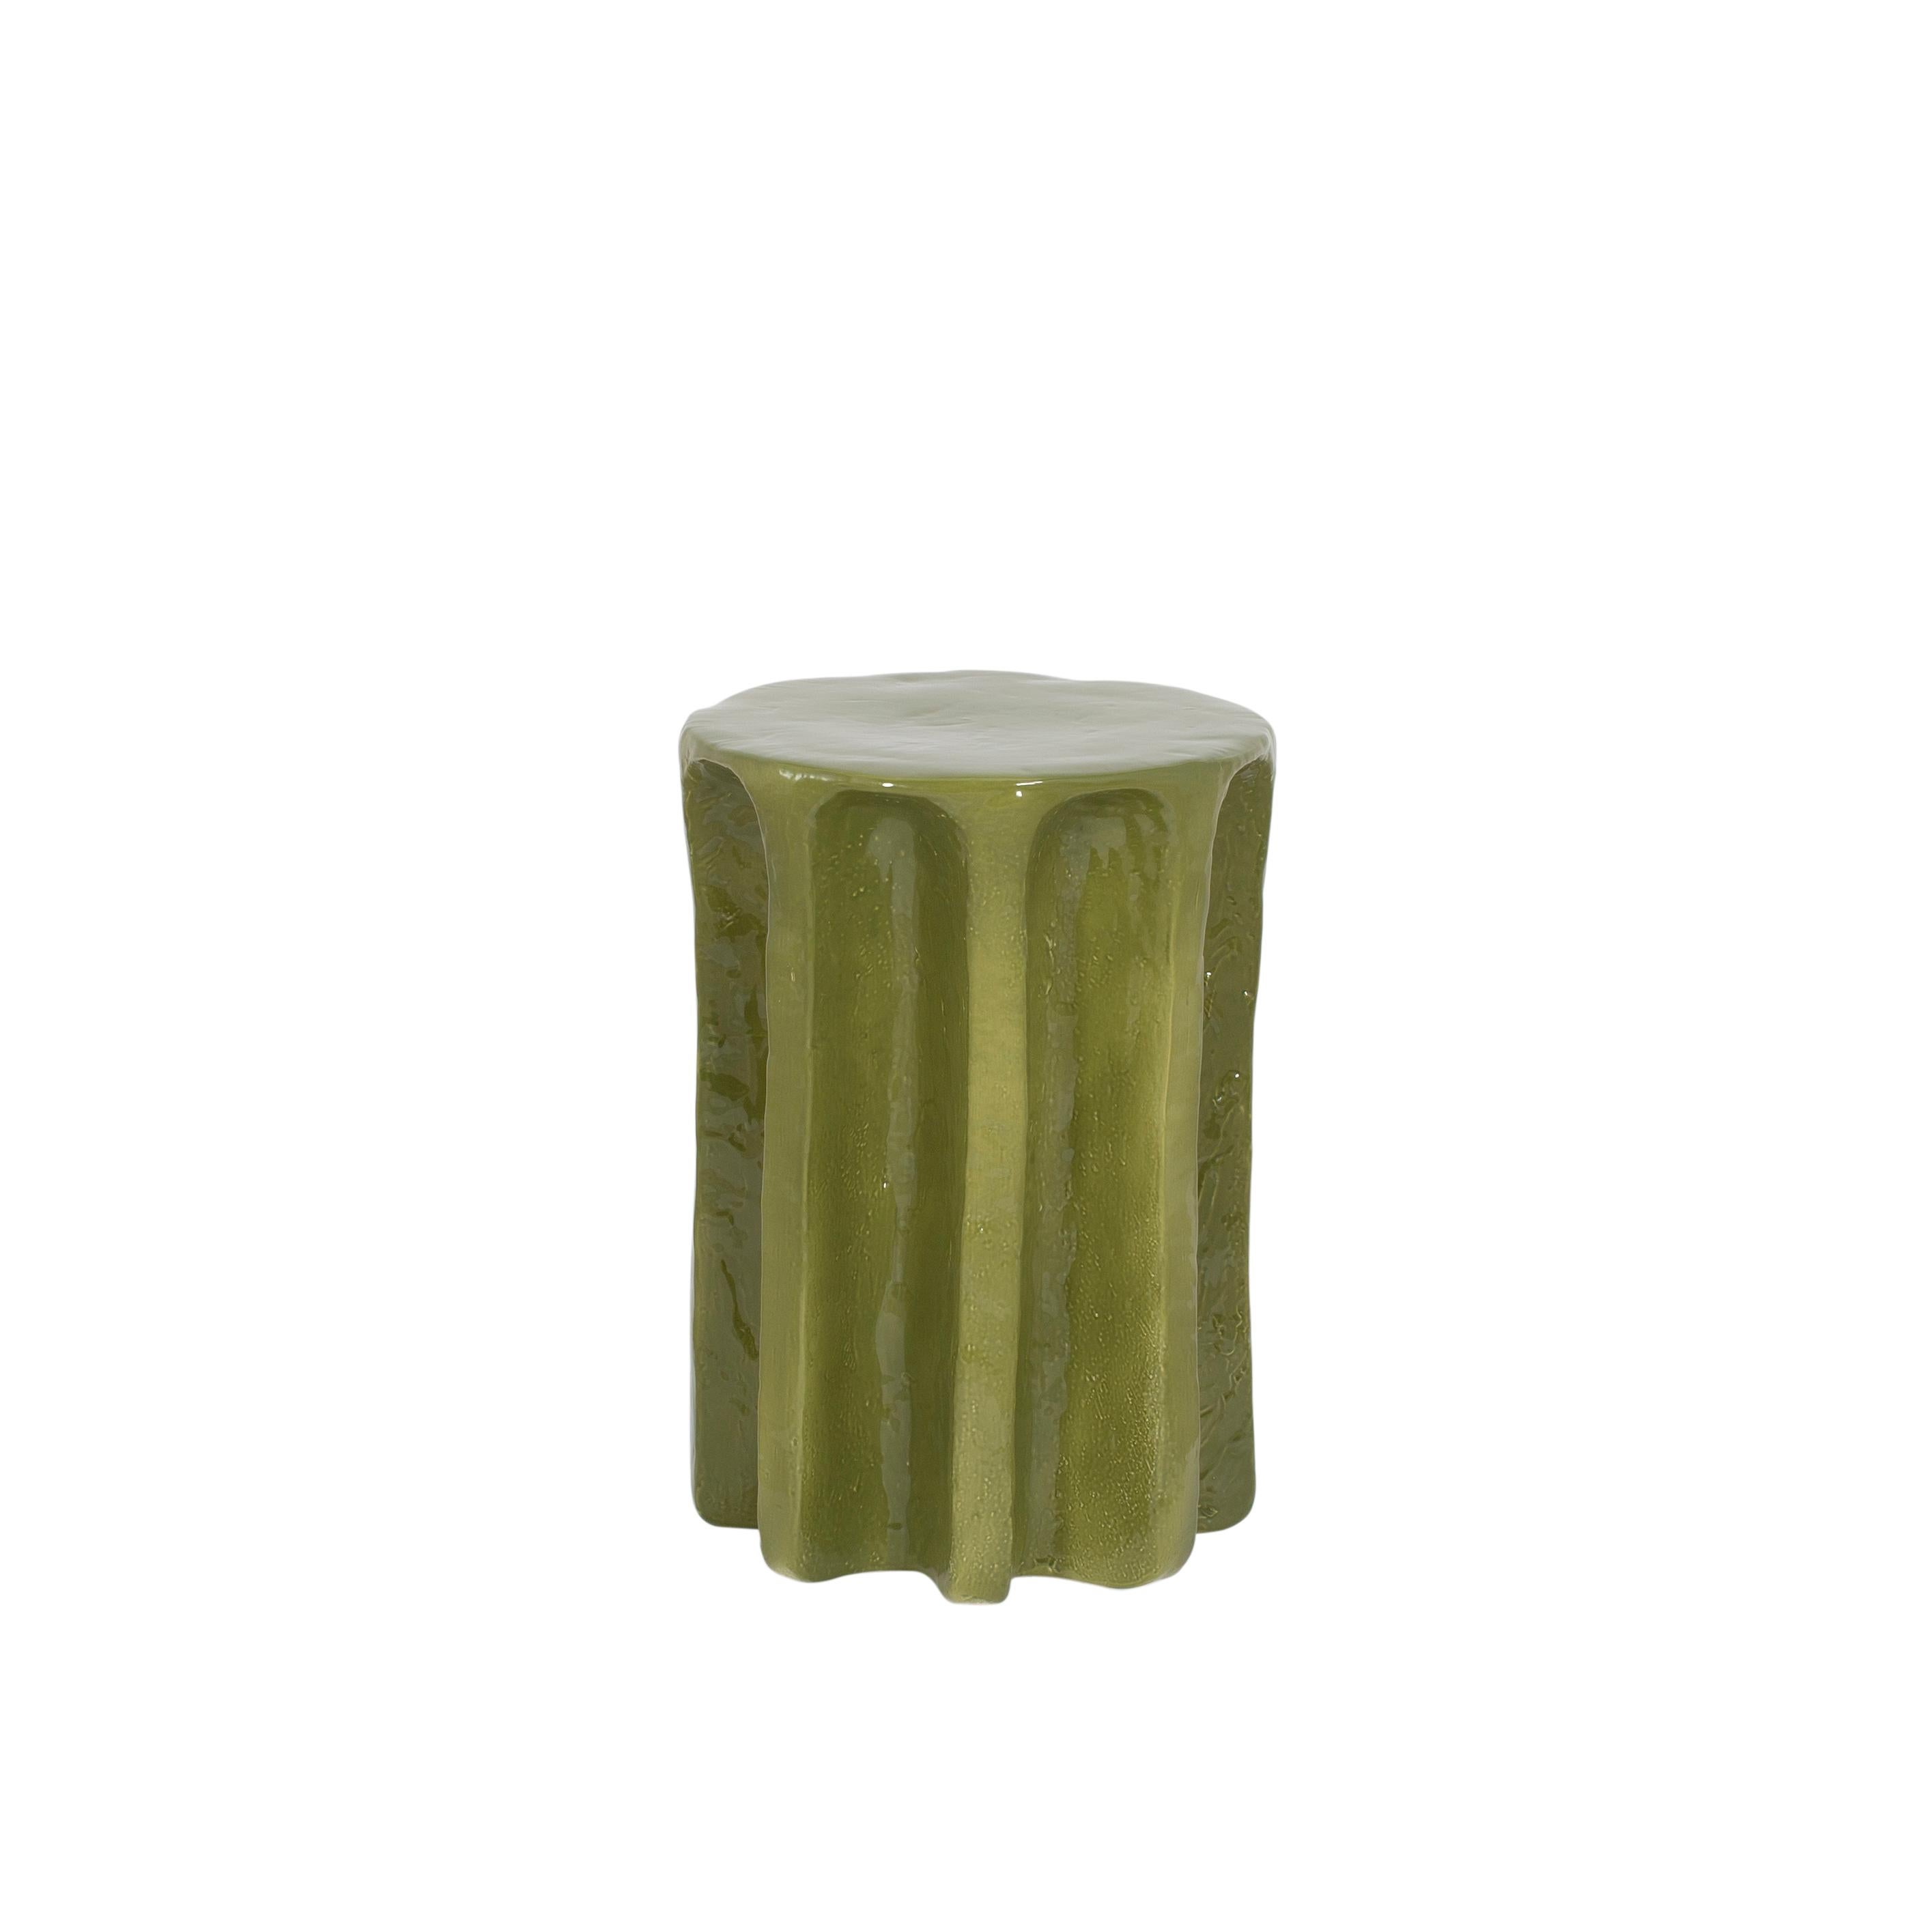 Chouchou High Green Side Table by Pulpo
Dimensions: D39 x H57 cm
Materials: ceramic

Also available in different Colours. Please contact us.

Chouchou bears the contours of an antique column – which, knowing designer Lorenzo Zanovello’s, is most